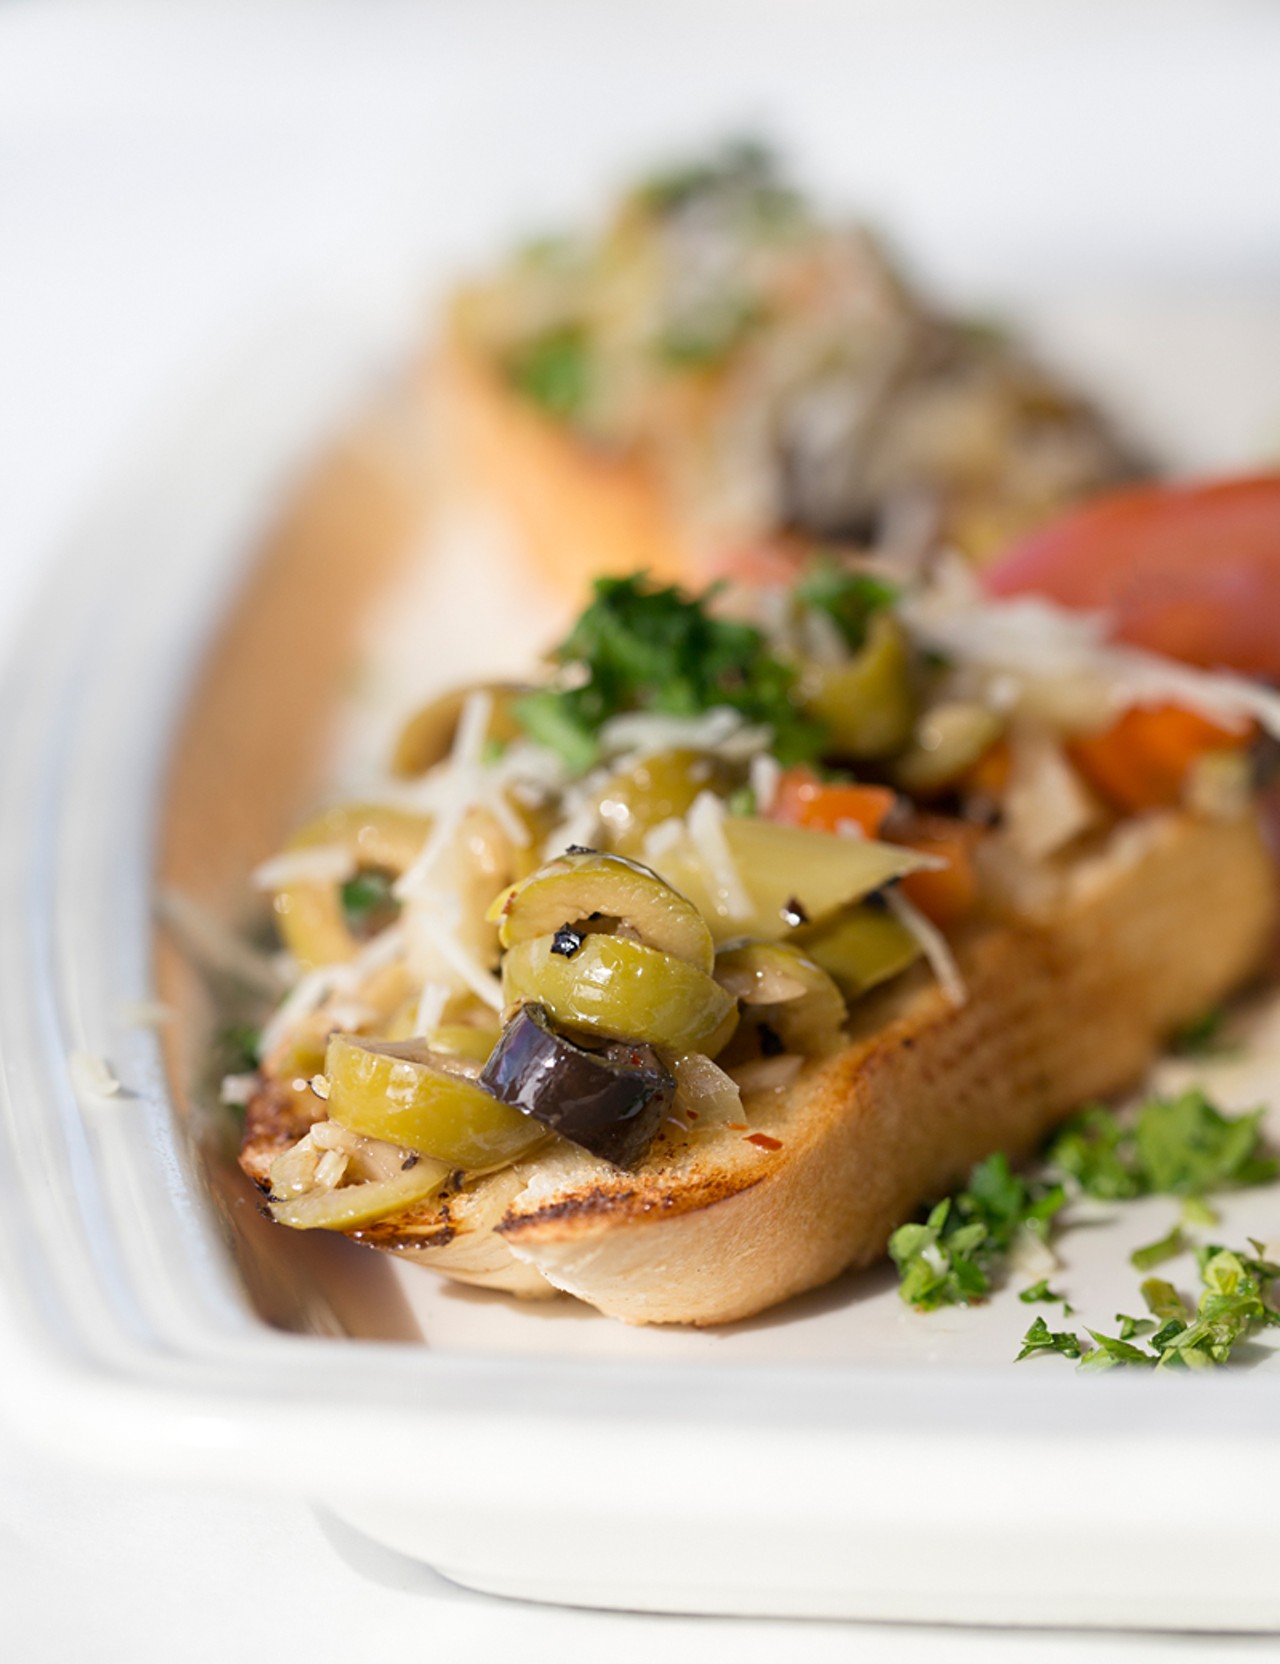 Muffaletta olive bruschetta is a house recipe served on toasted French bread.